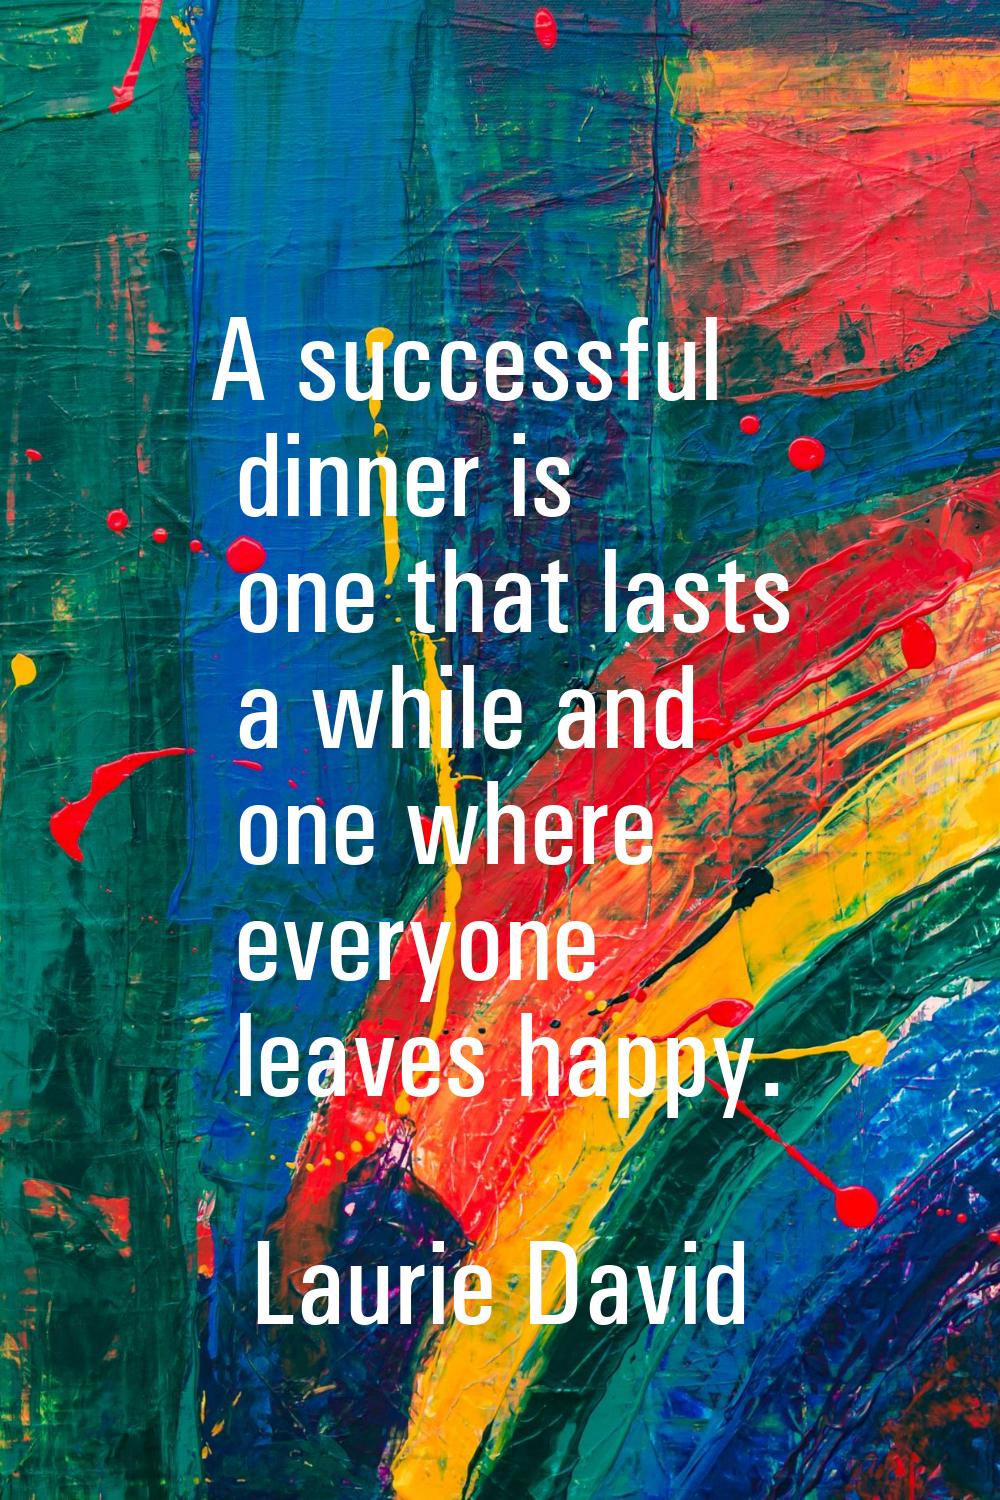 A successful dinner is one that lasts a while and one where everyone leaves happy.